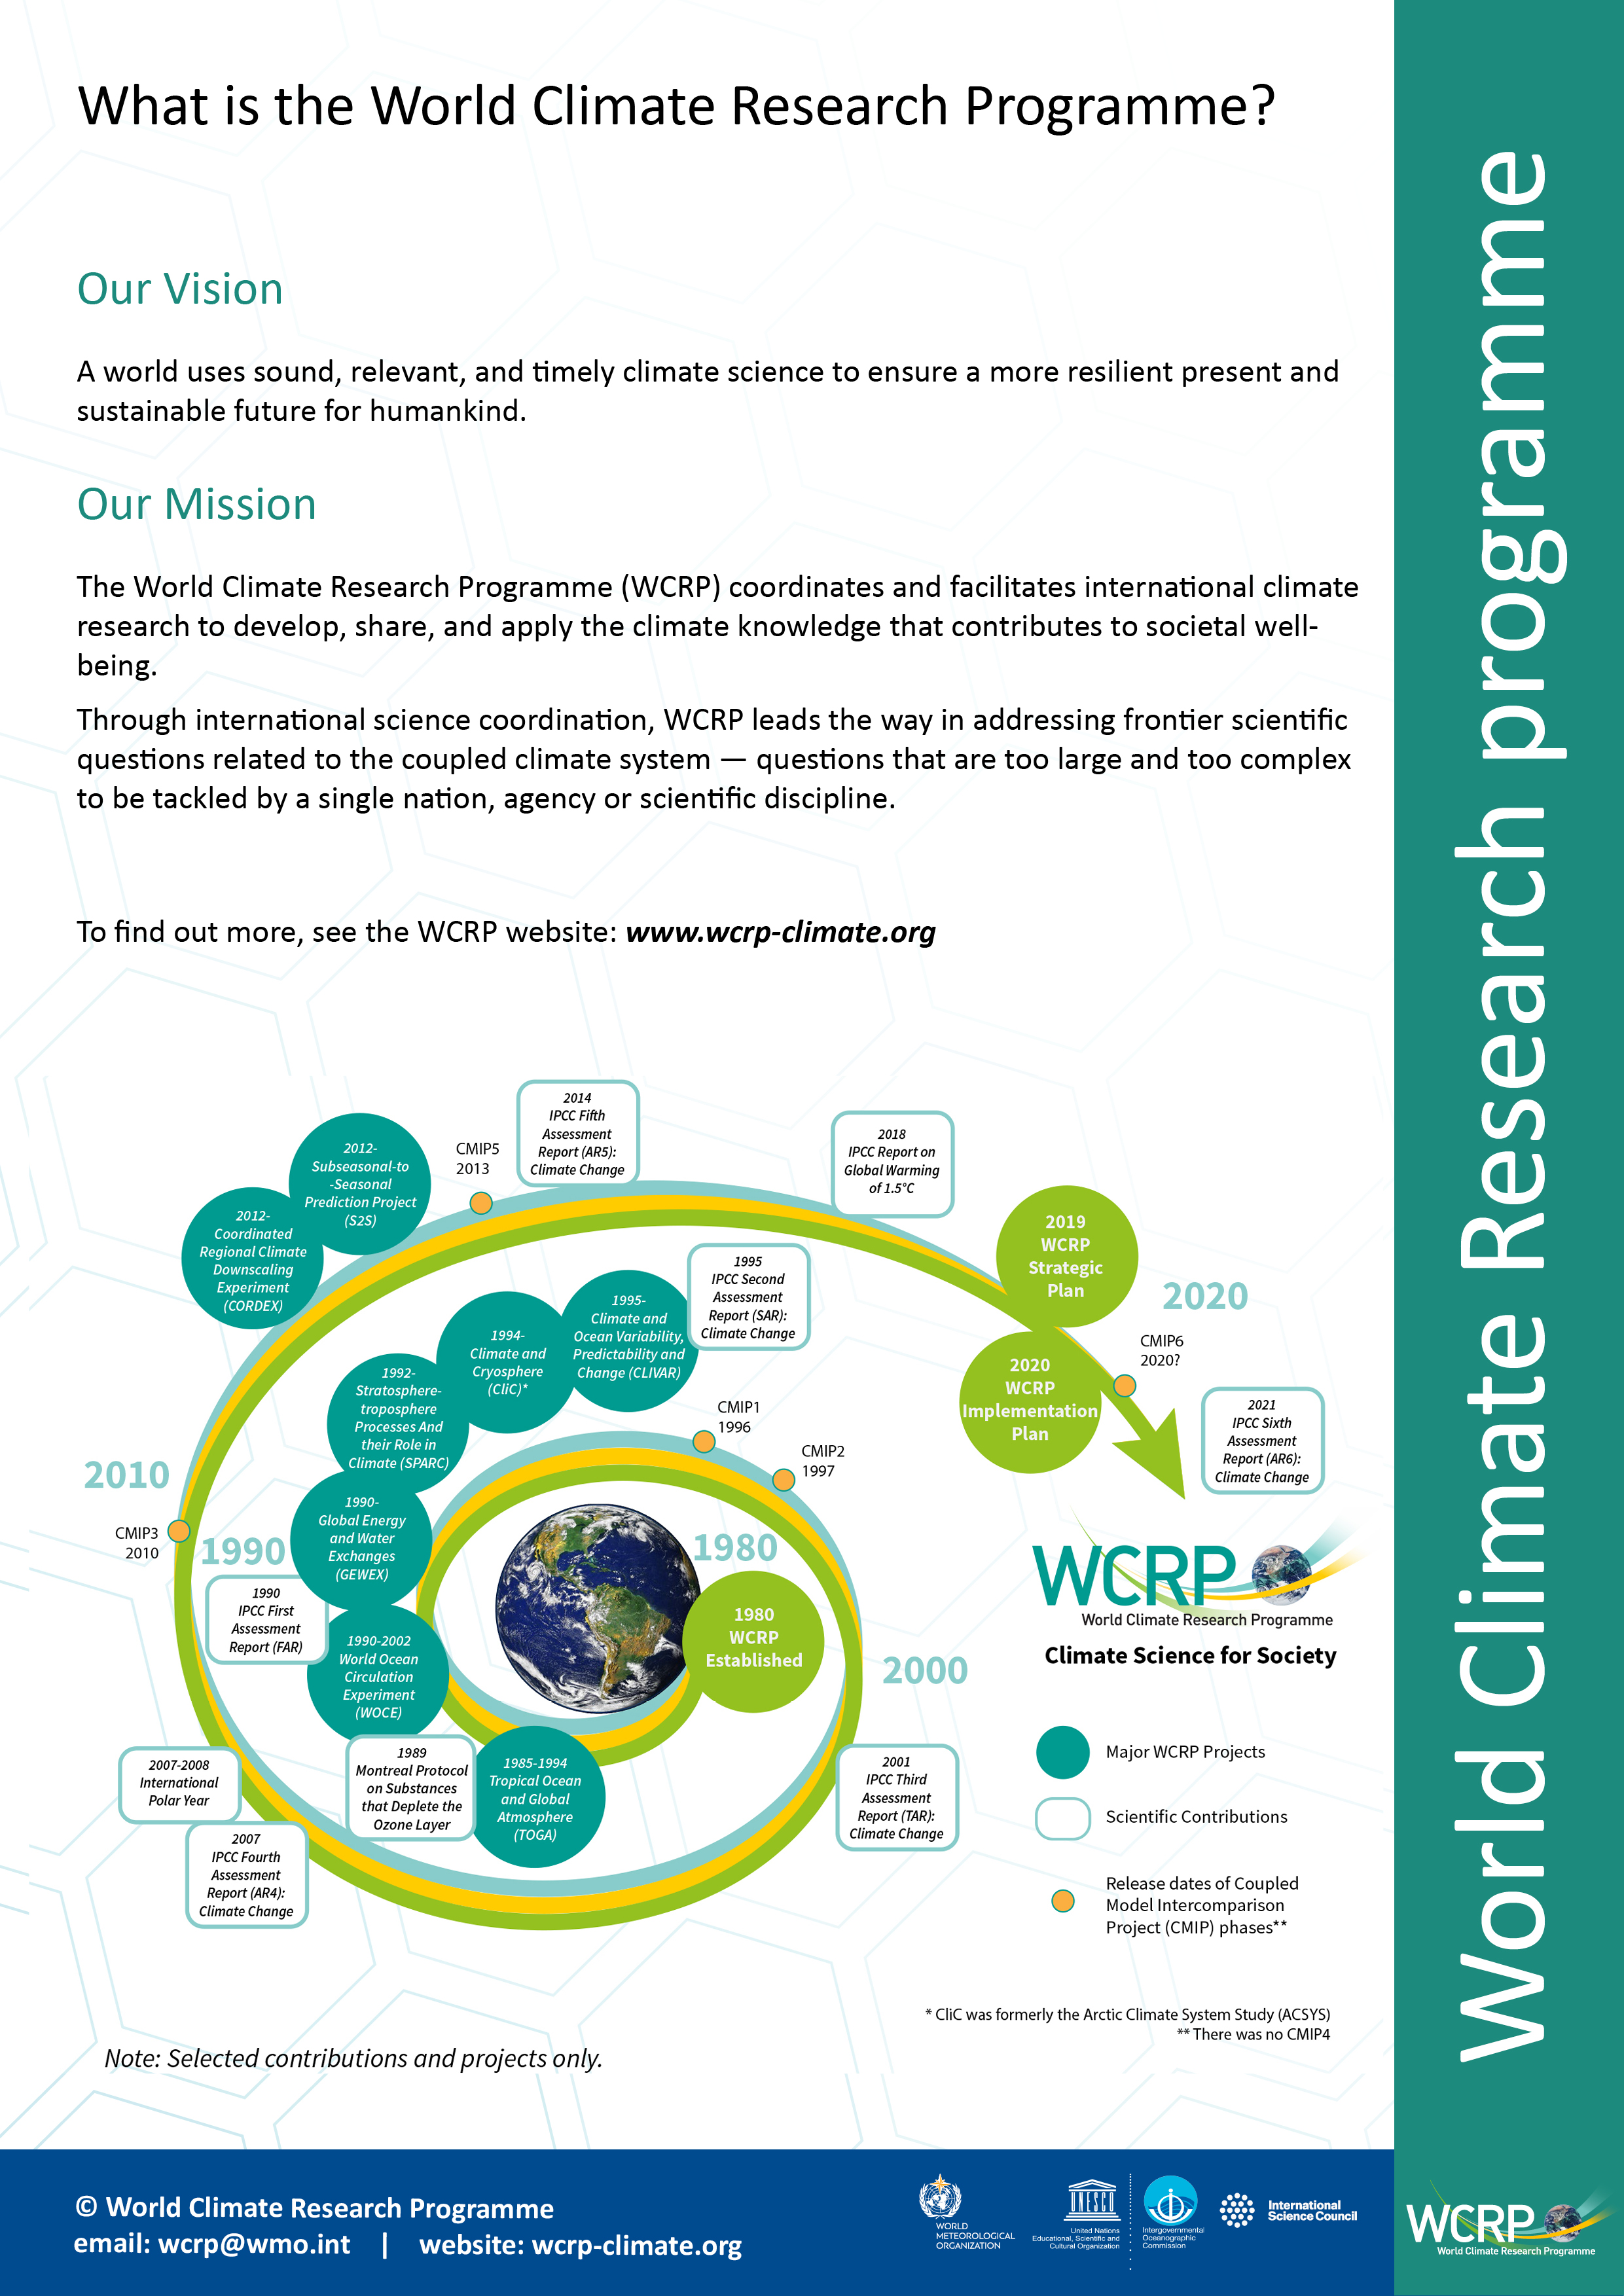 WCRP Overview